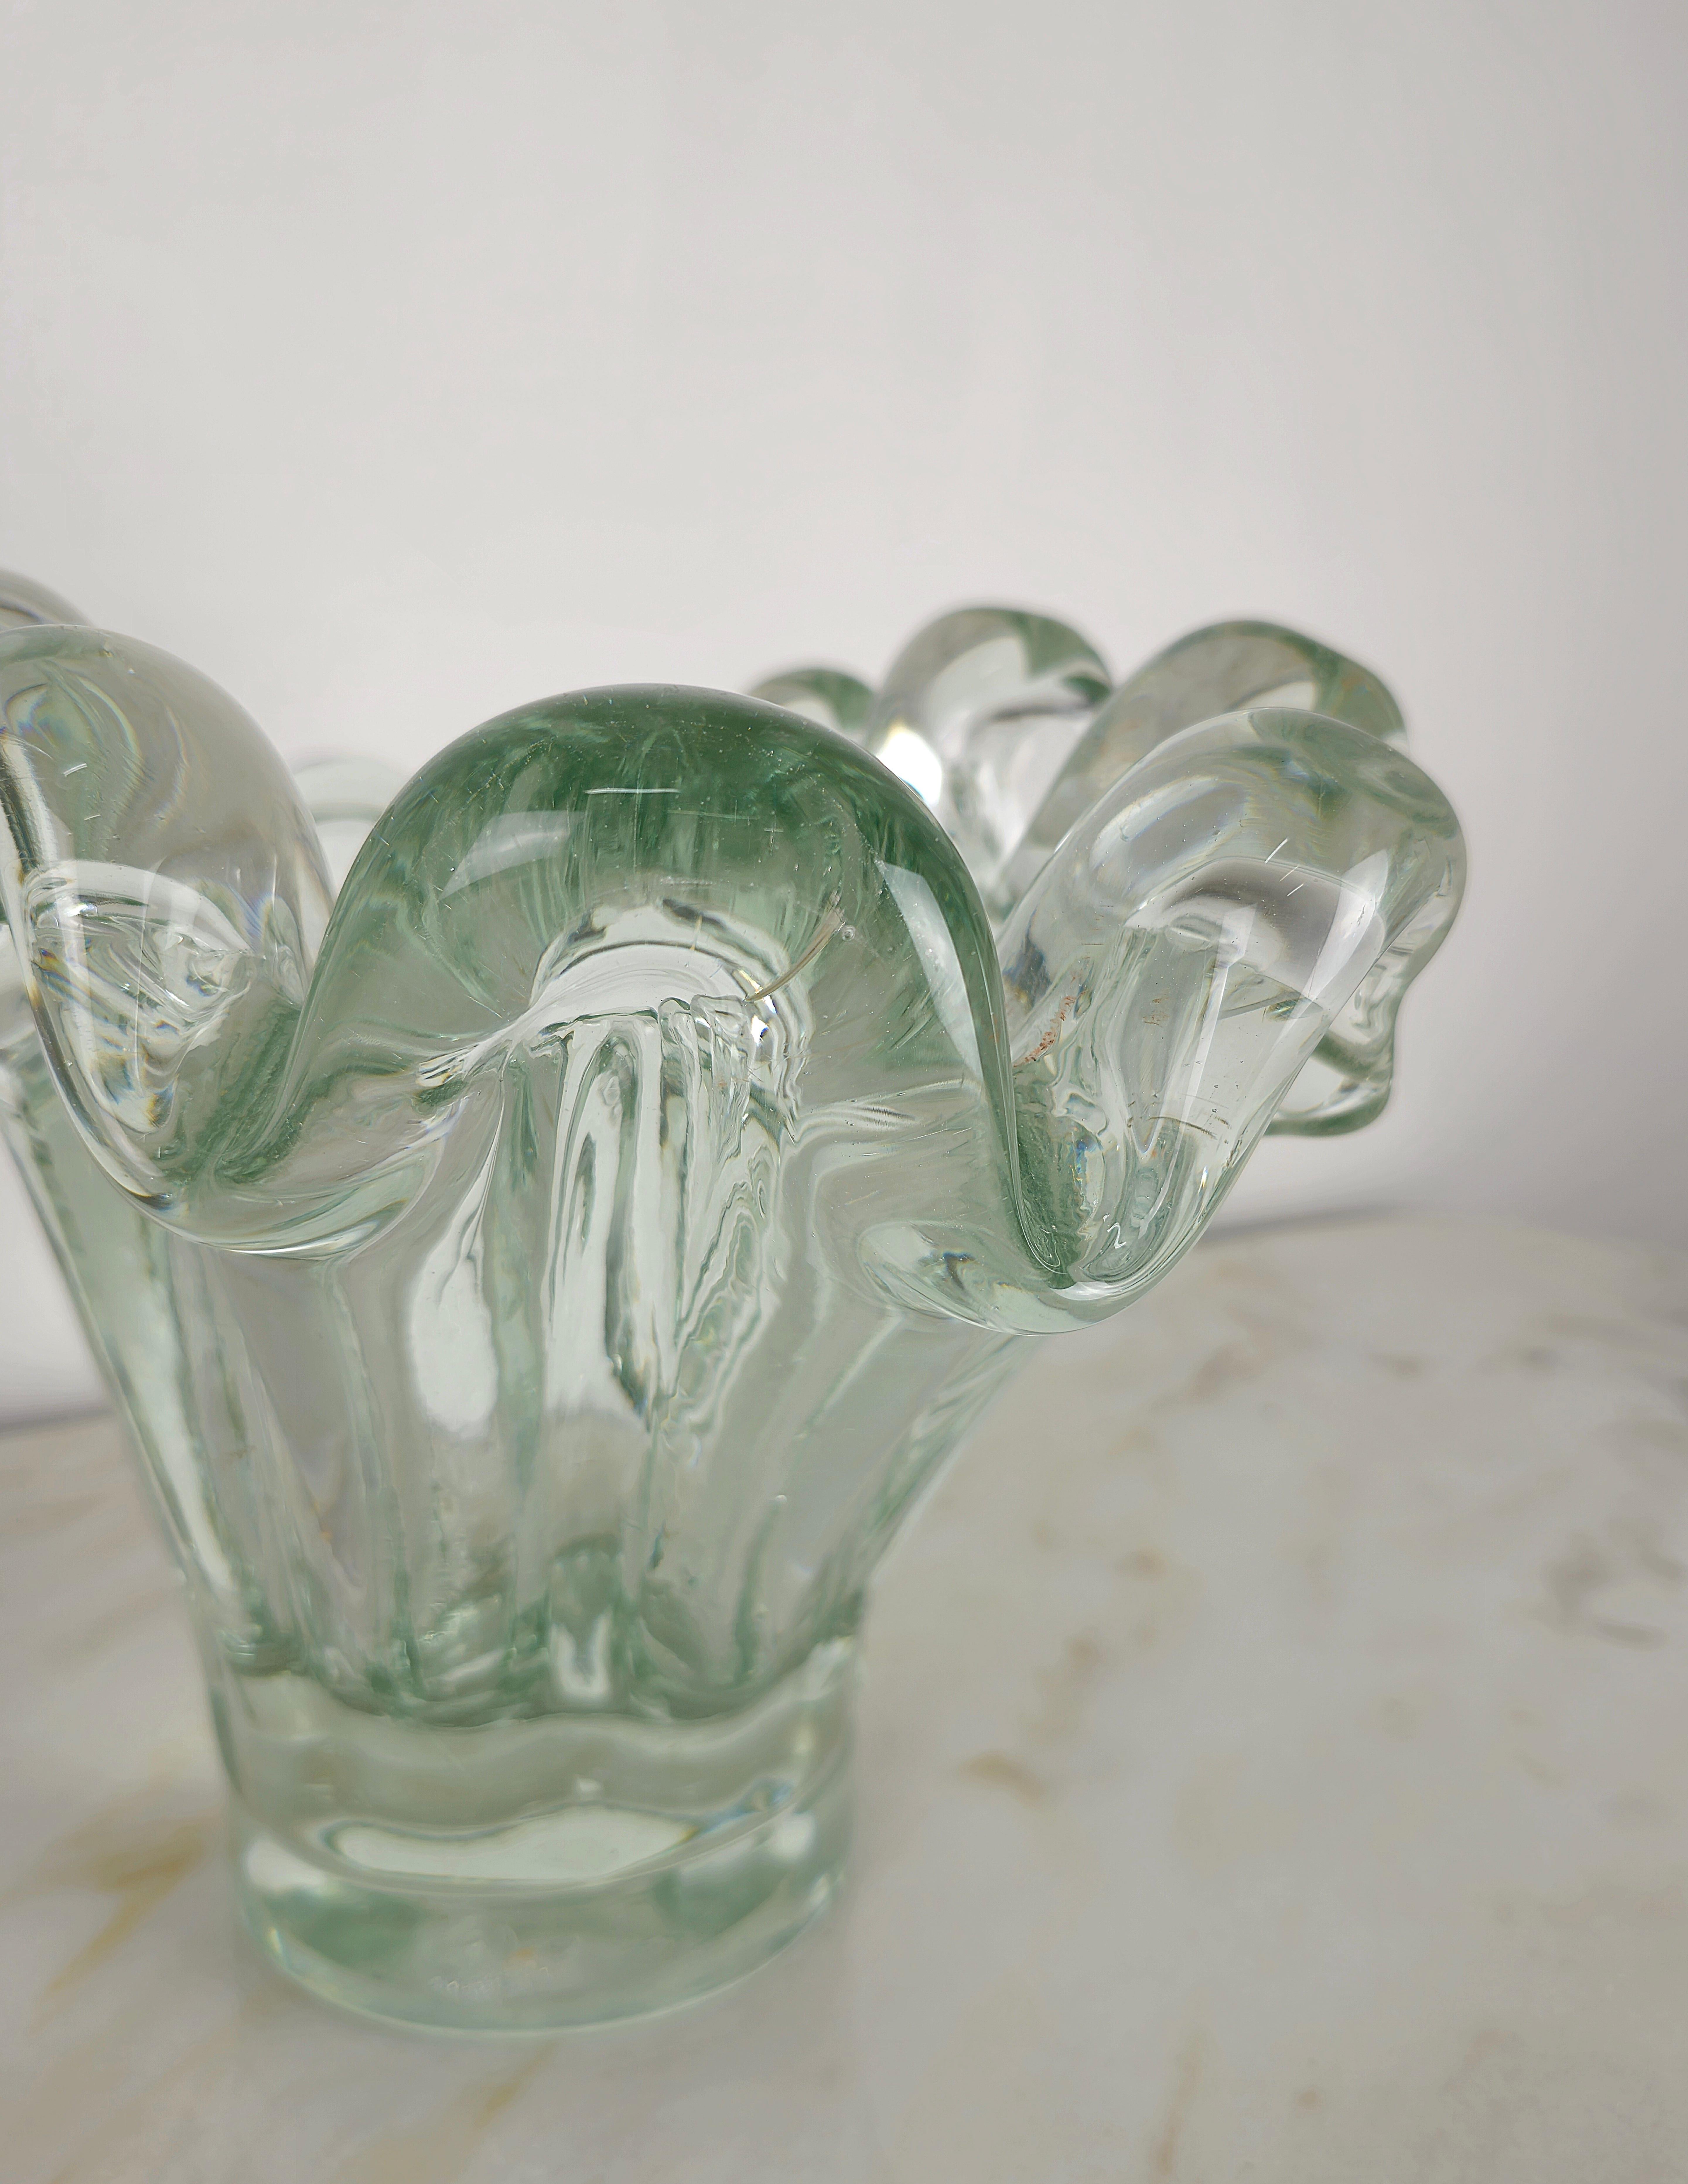 20th Century Vase Decorative Object Transparent Murano Glass Large Midcentury Italy 1960s For Sale